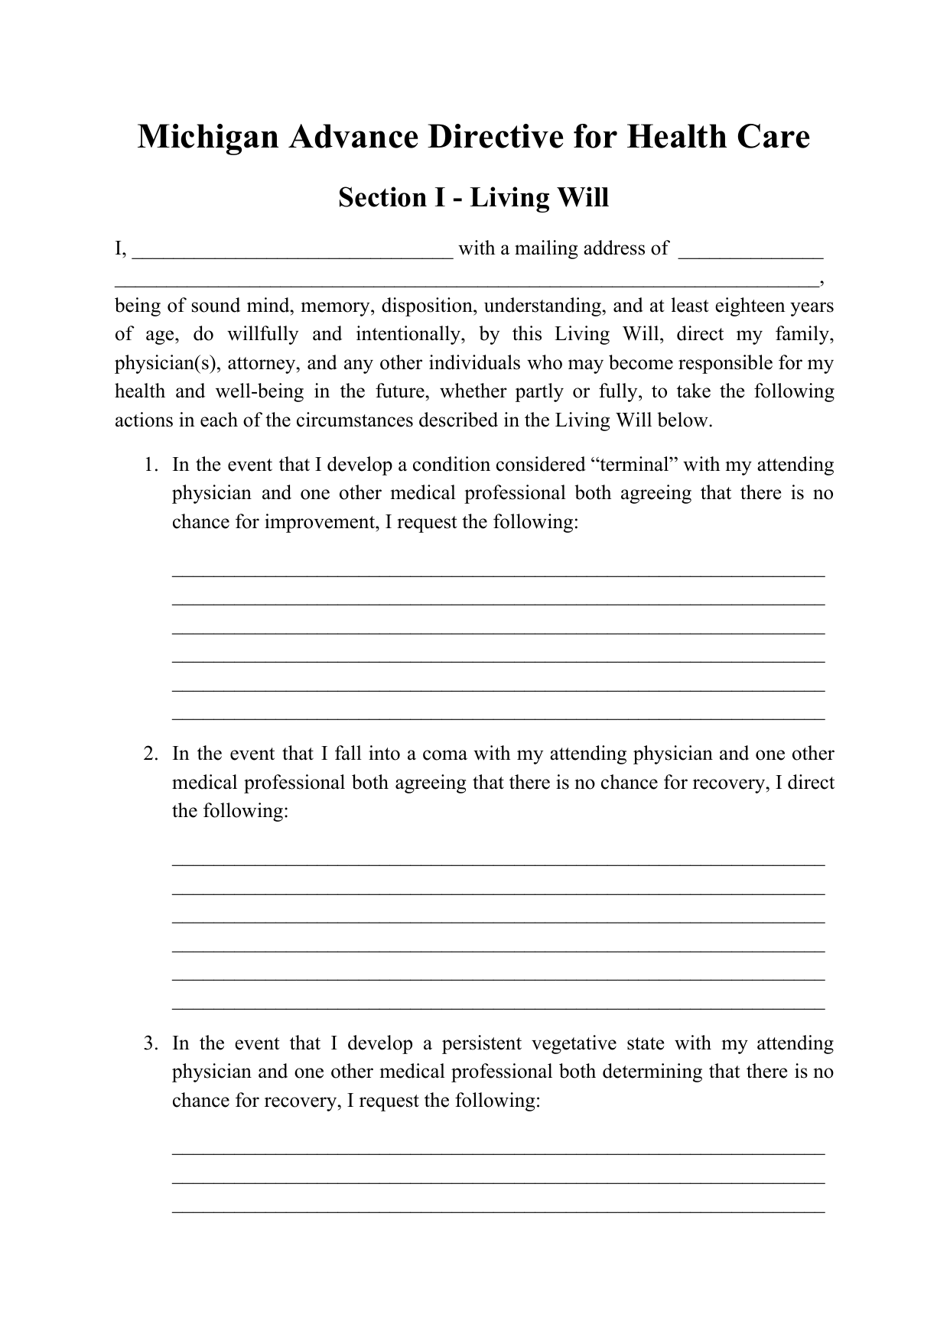 Advance Directive for Health Care Form - Michigan, Page 1